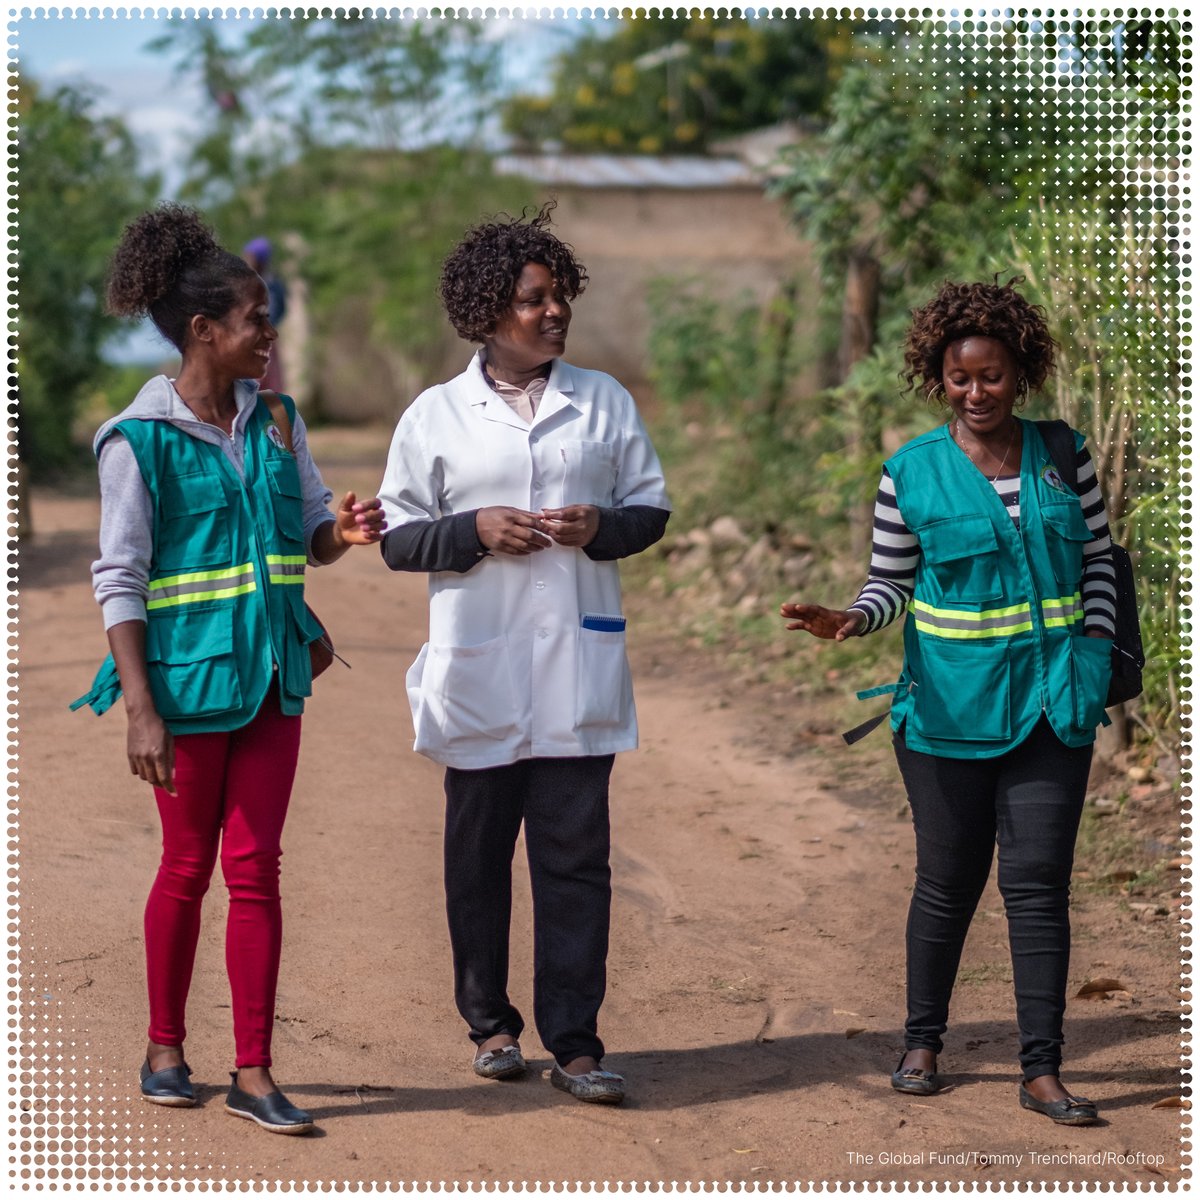 Great News: @GlobalFund launches US$771 million in grants to Mozambique to: ✅ Increase ARV coverage among people living with HIV to 81% by 2025. ✅ Sustain TB treatment success rate at 90% or above. ✅ Provide access to malaria diagnosis & treatment. theglobalfund.org/en/updates/202…